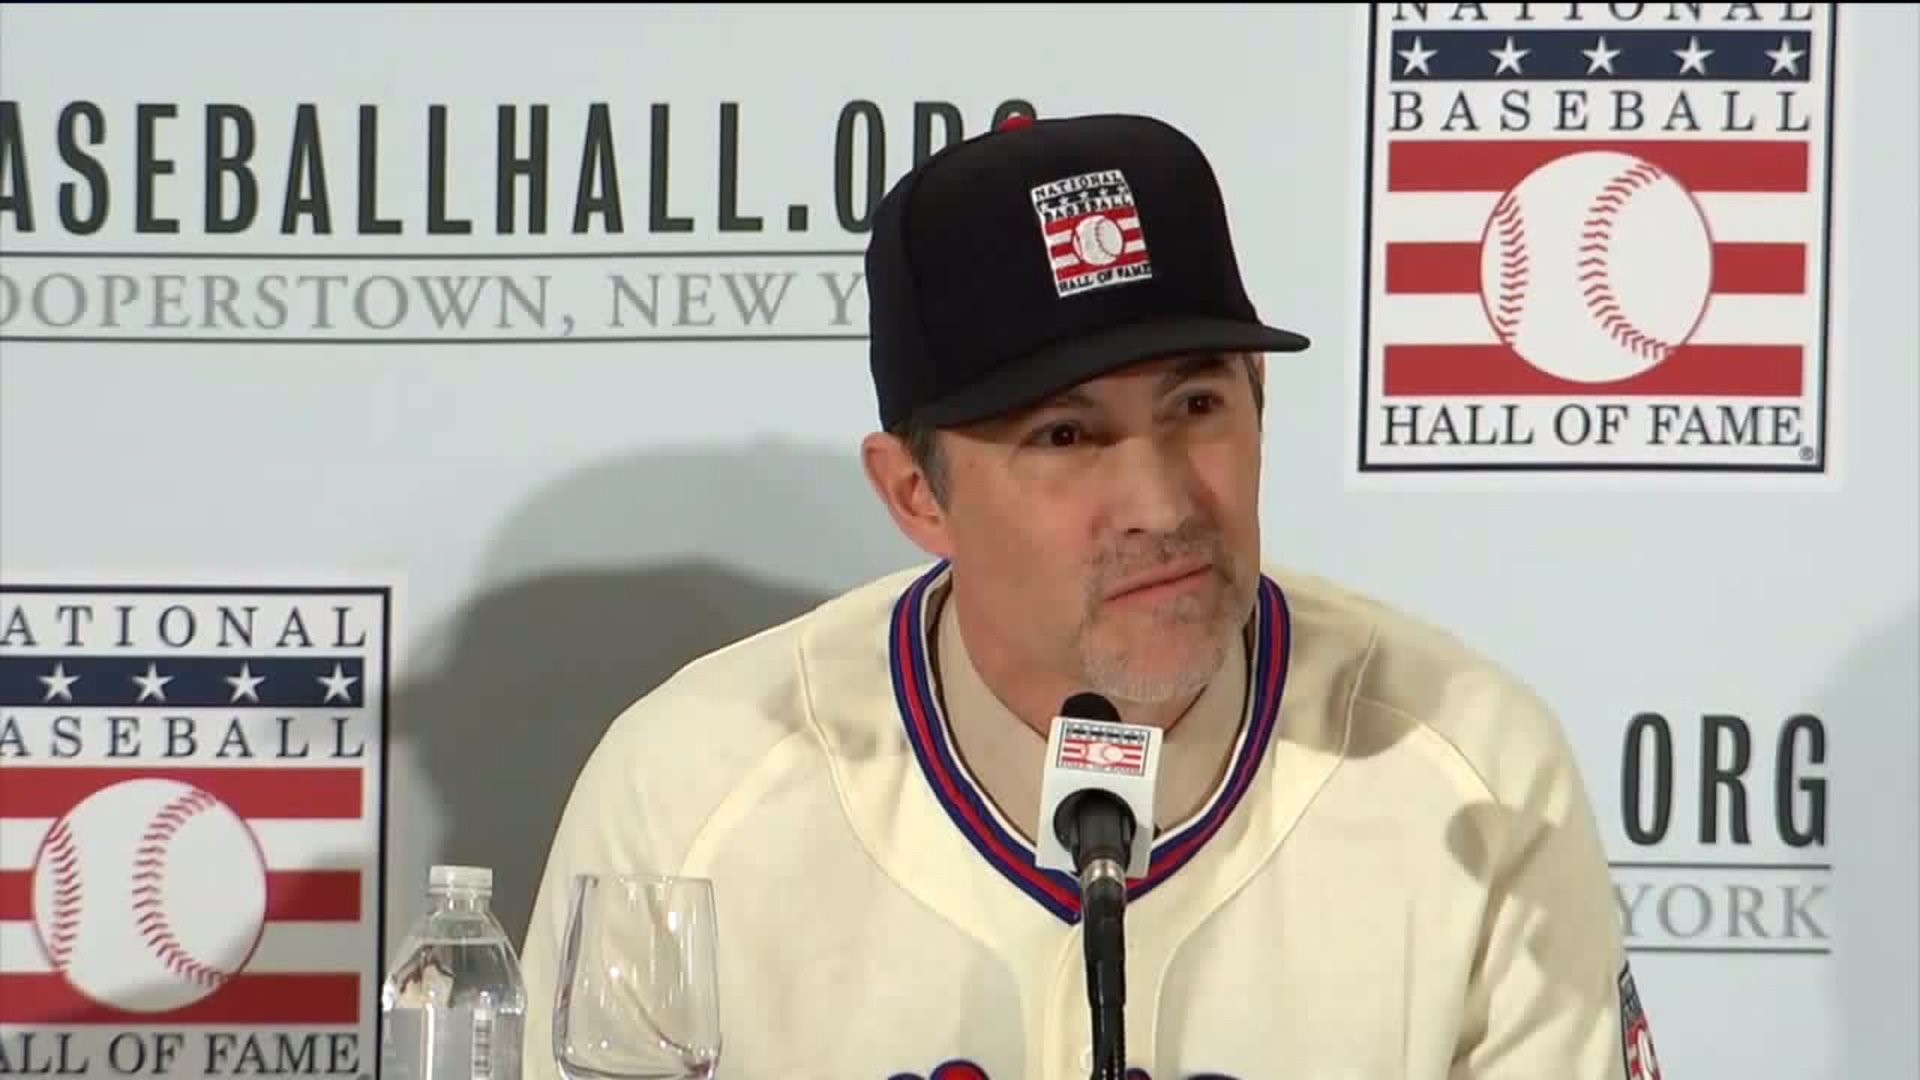 Mike Mussina Speaks At Hall of Fame Press Conference